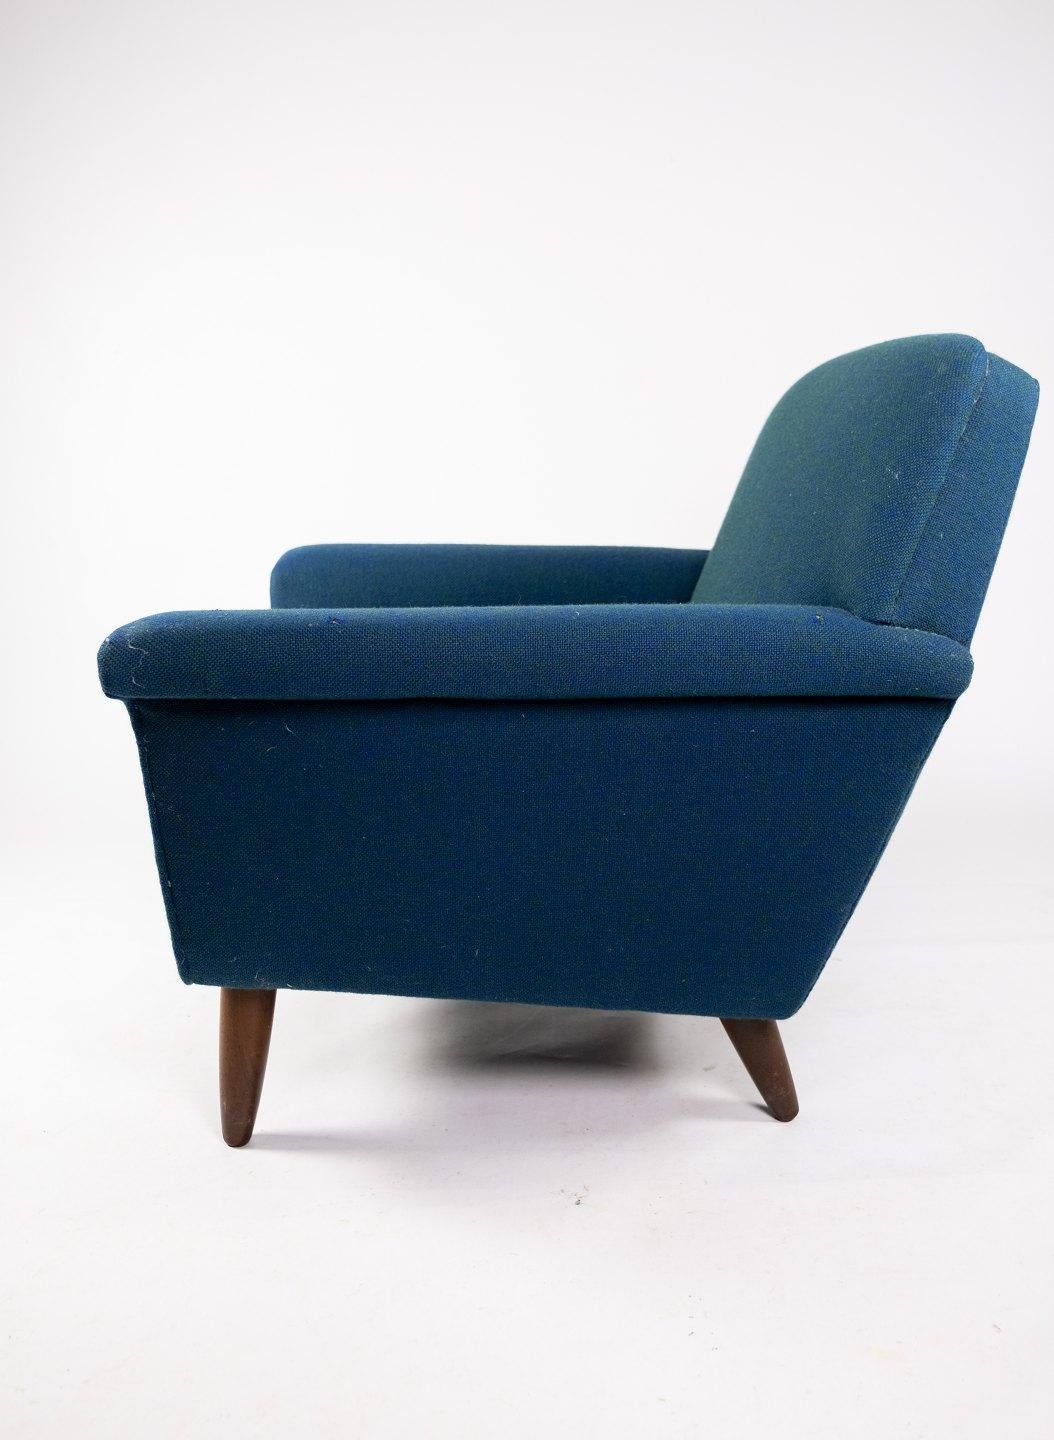 Mid-20th Century Armchair Upholstered with Dark Blue Wool Fabric and Legs in Dark Wood, 1960s For Sale